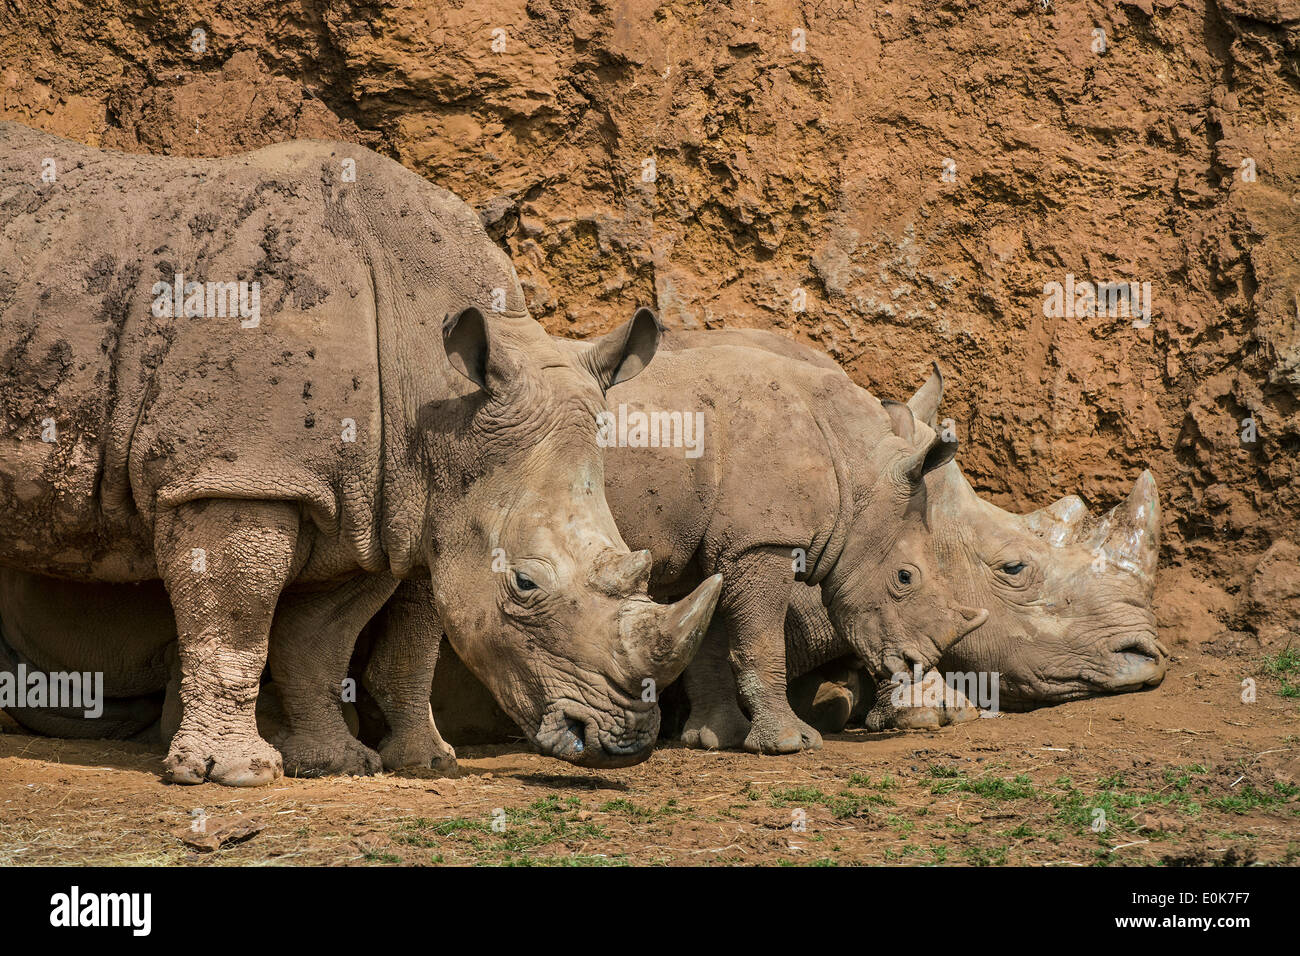 African white rhino / Square-lipped rhinoceros (Ceratotherium simum) family group showing male, female and calf resting Stock Photo